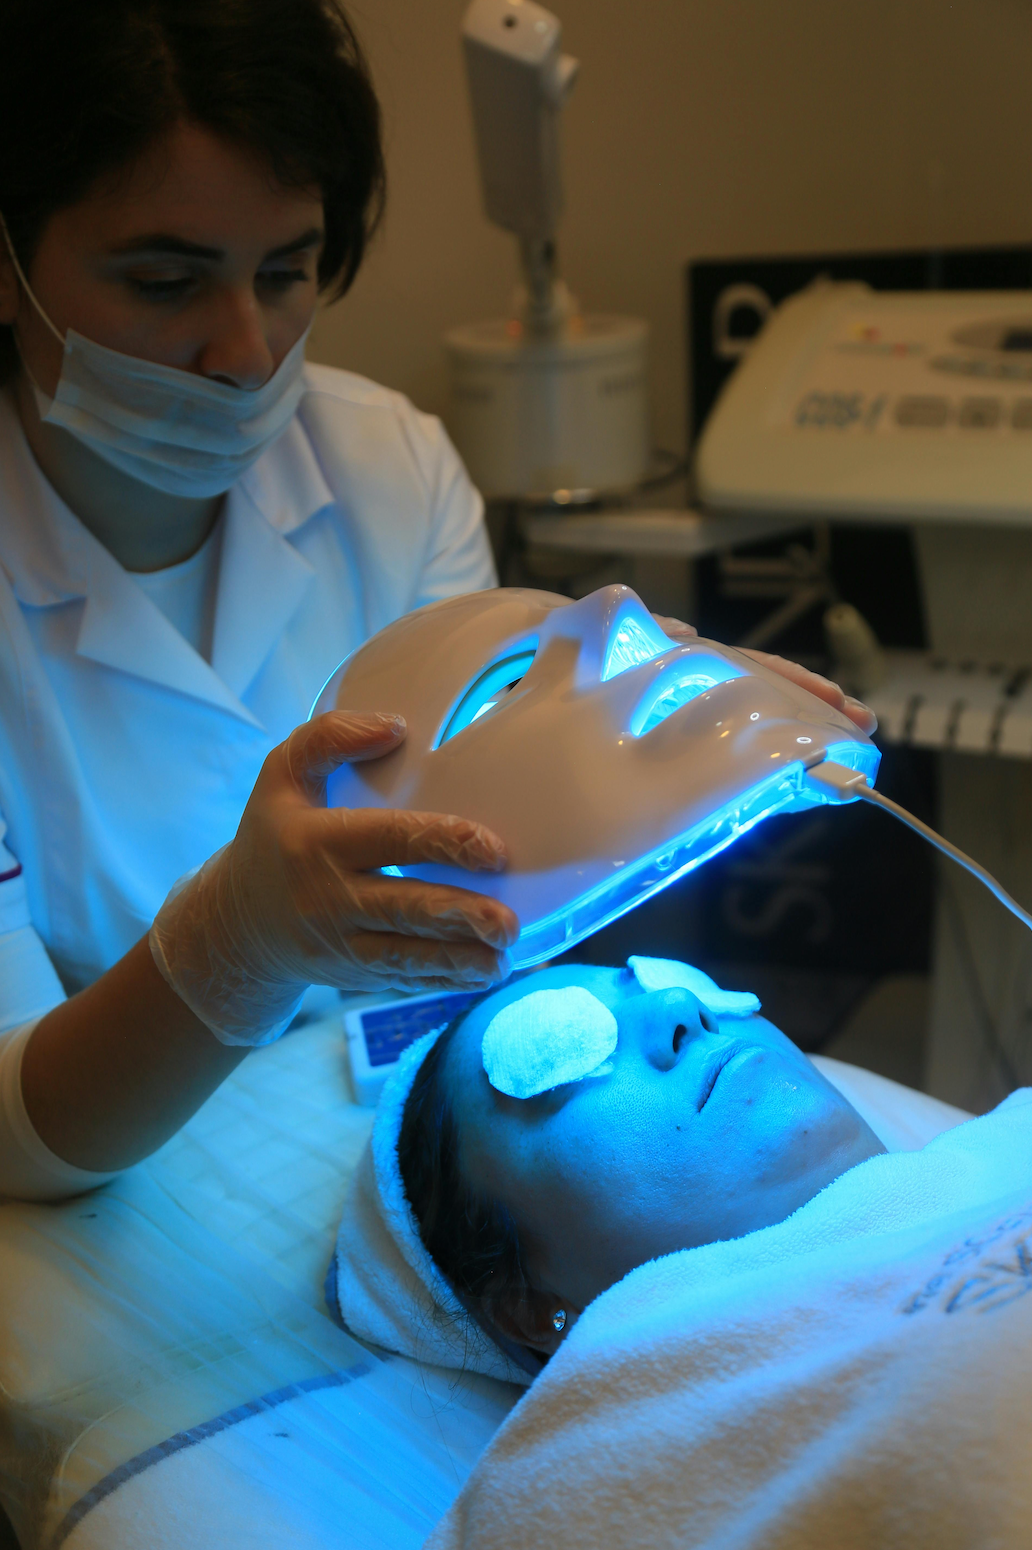 Shedding Light on Light Therapy: The Truth About Anti-Aging and Safety